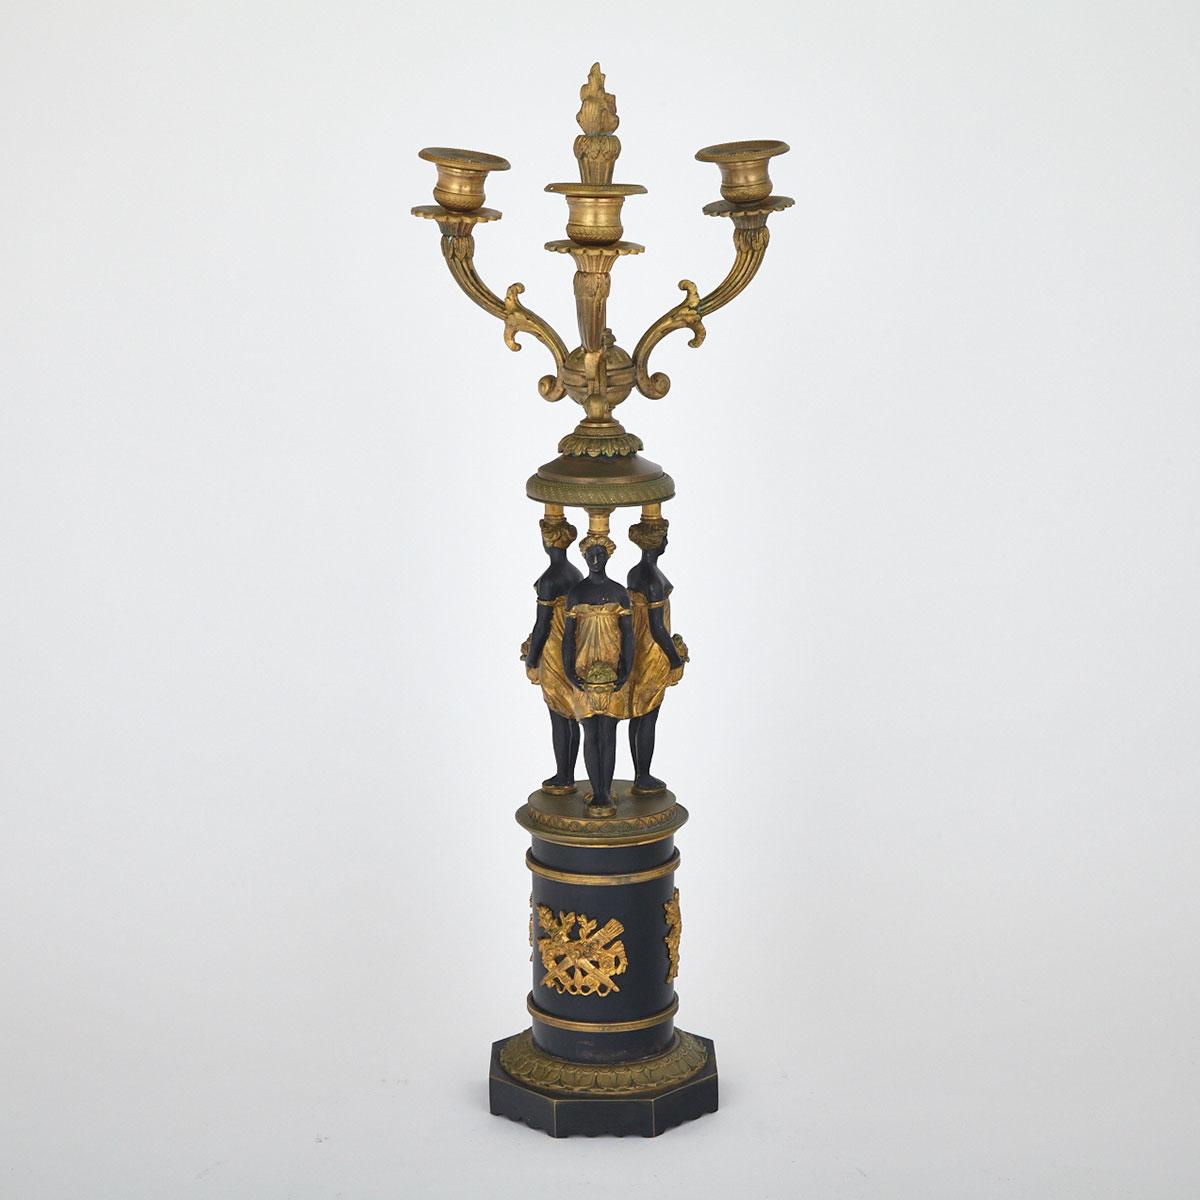 Austrian Empire Style Gilt and Patinated Bronze Figural Candelabrum, 19th/early 20th century